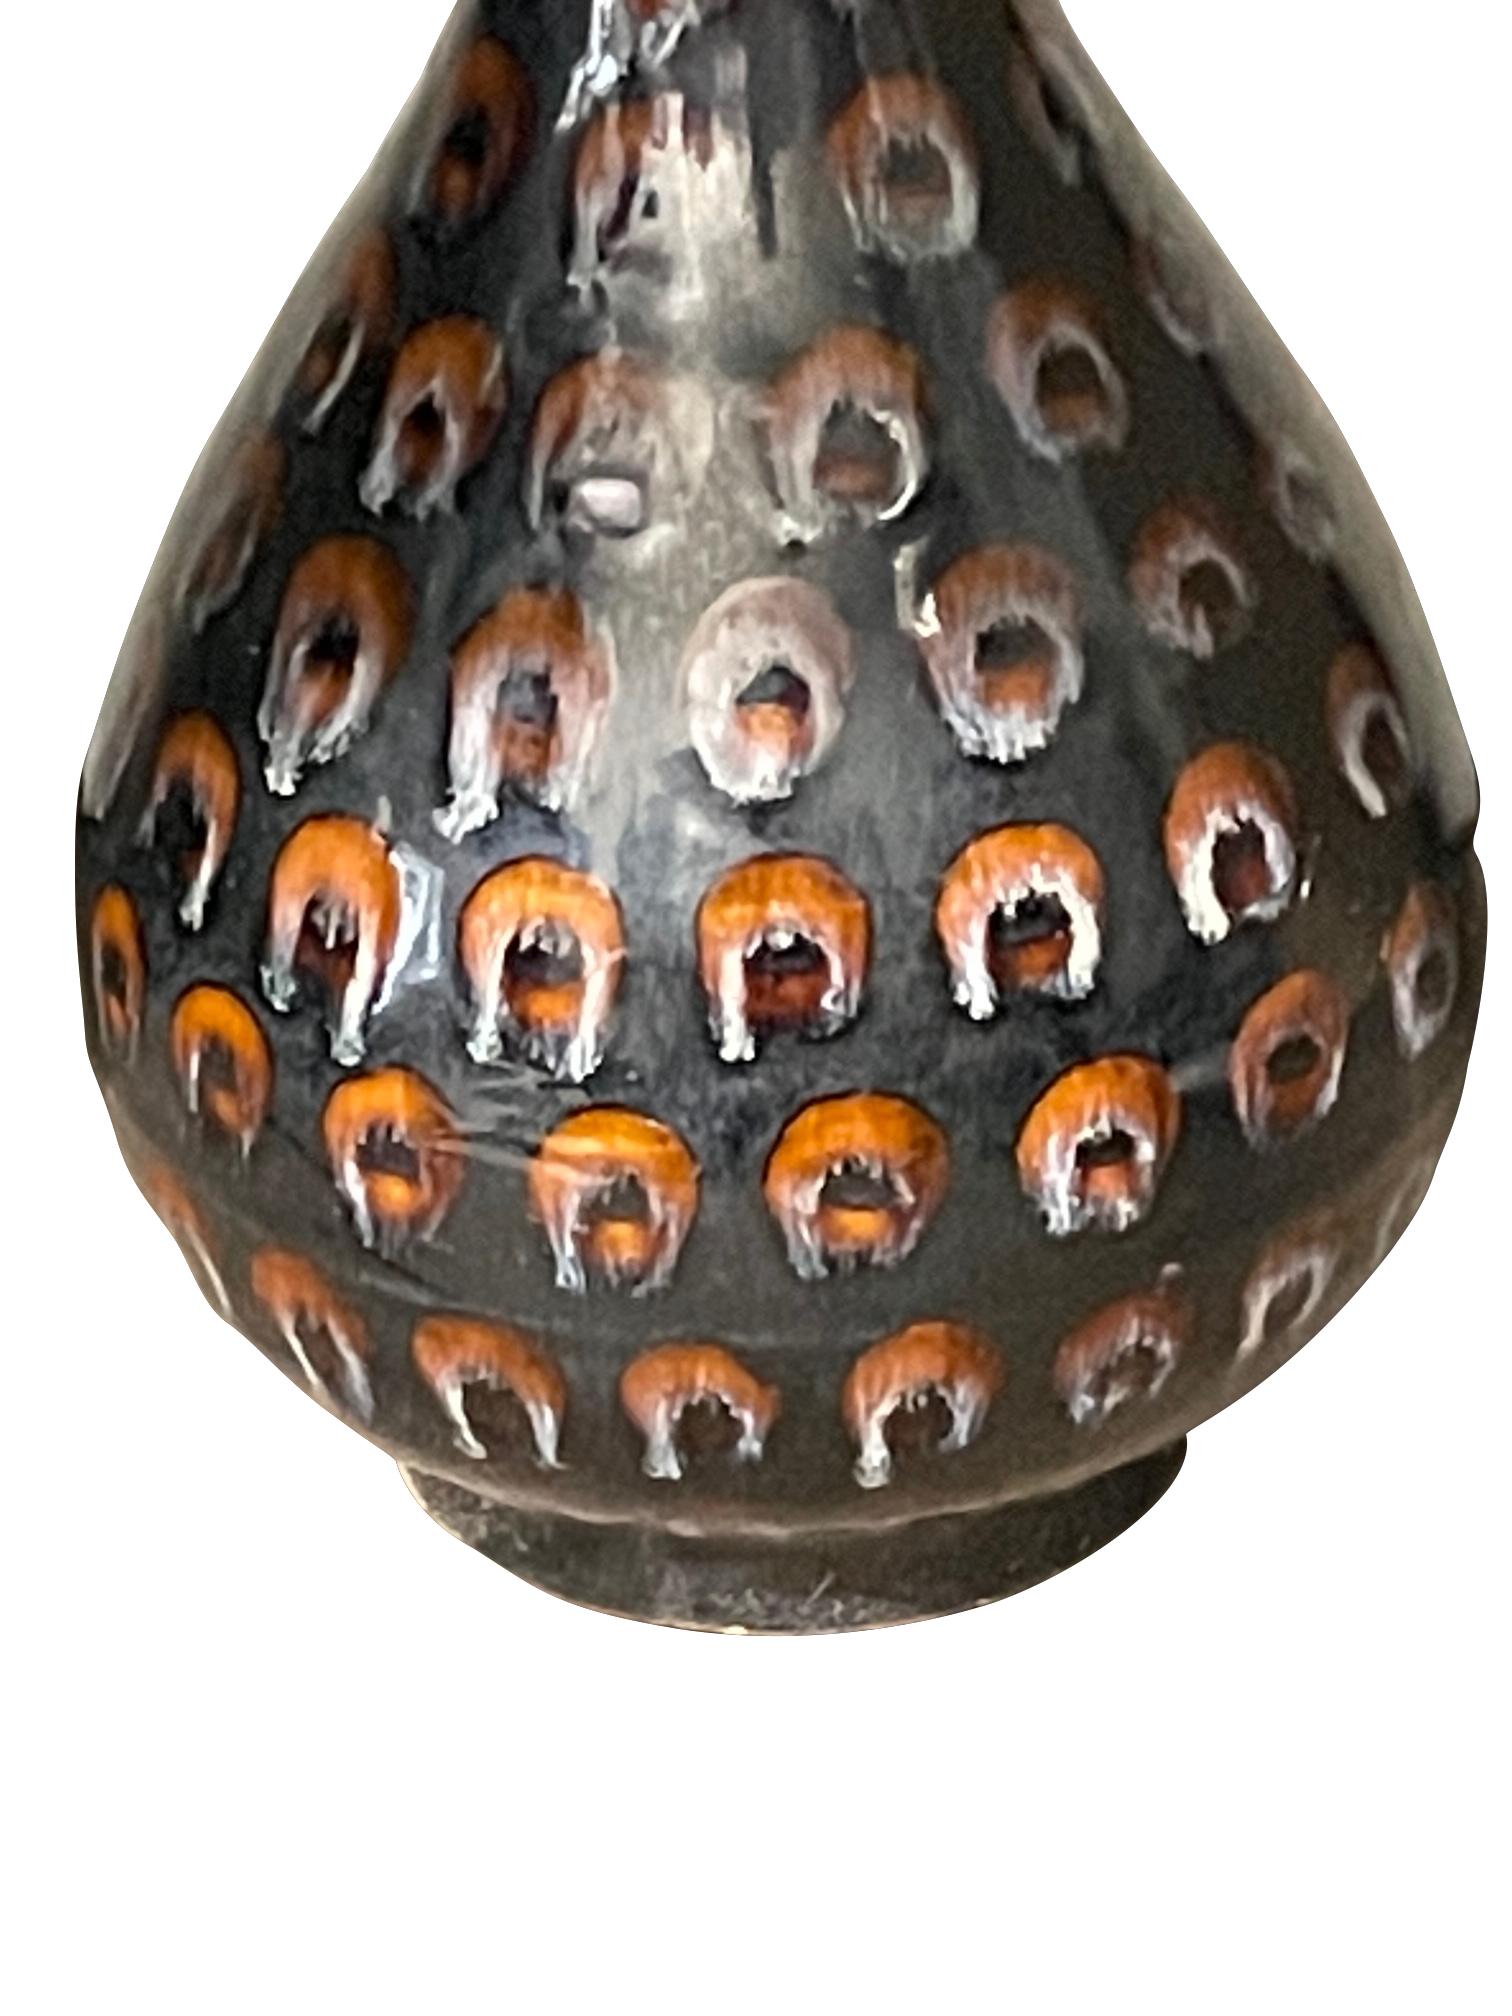 Contemporary Chinese stoneware vase with black ground with hand painted orange circles.
Part of a large collection.